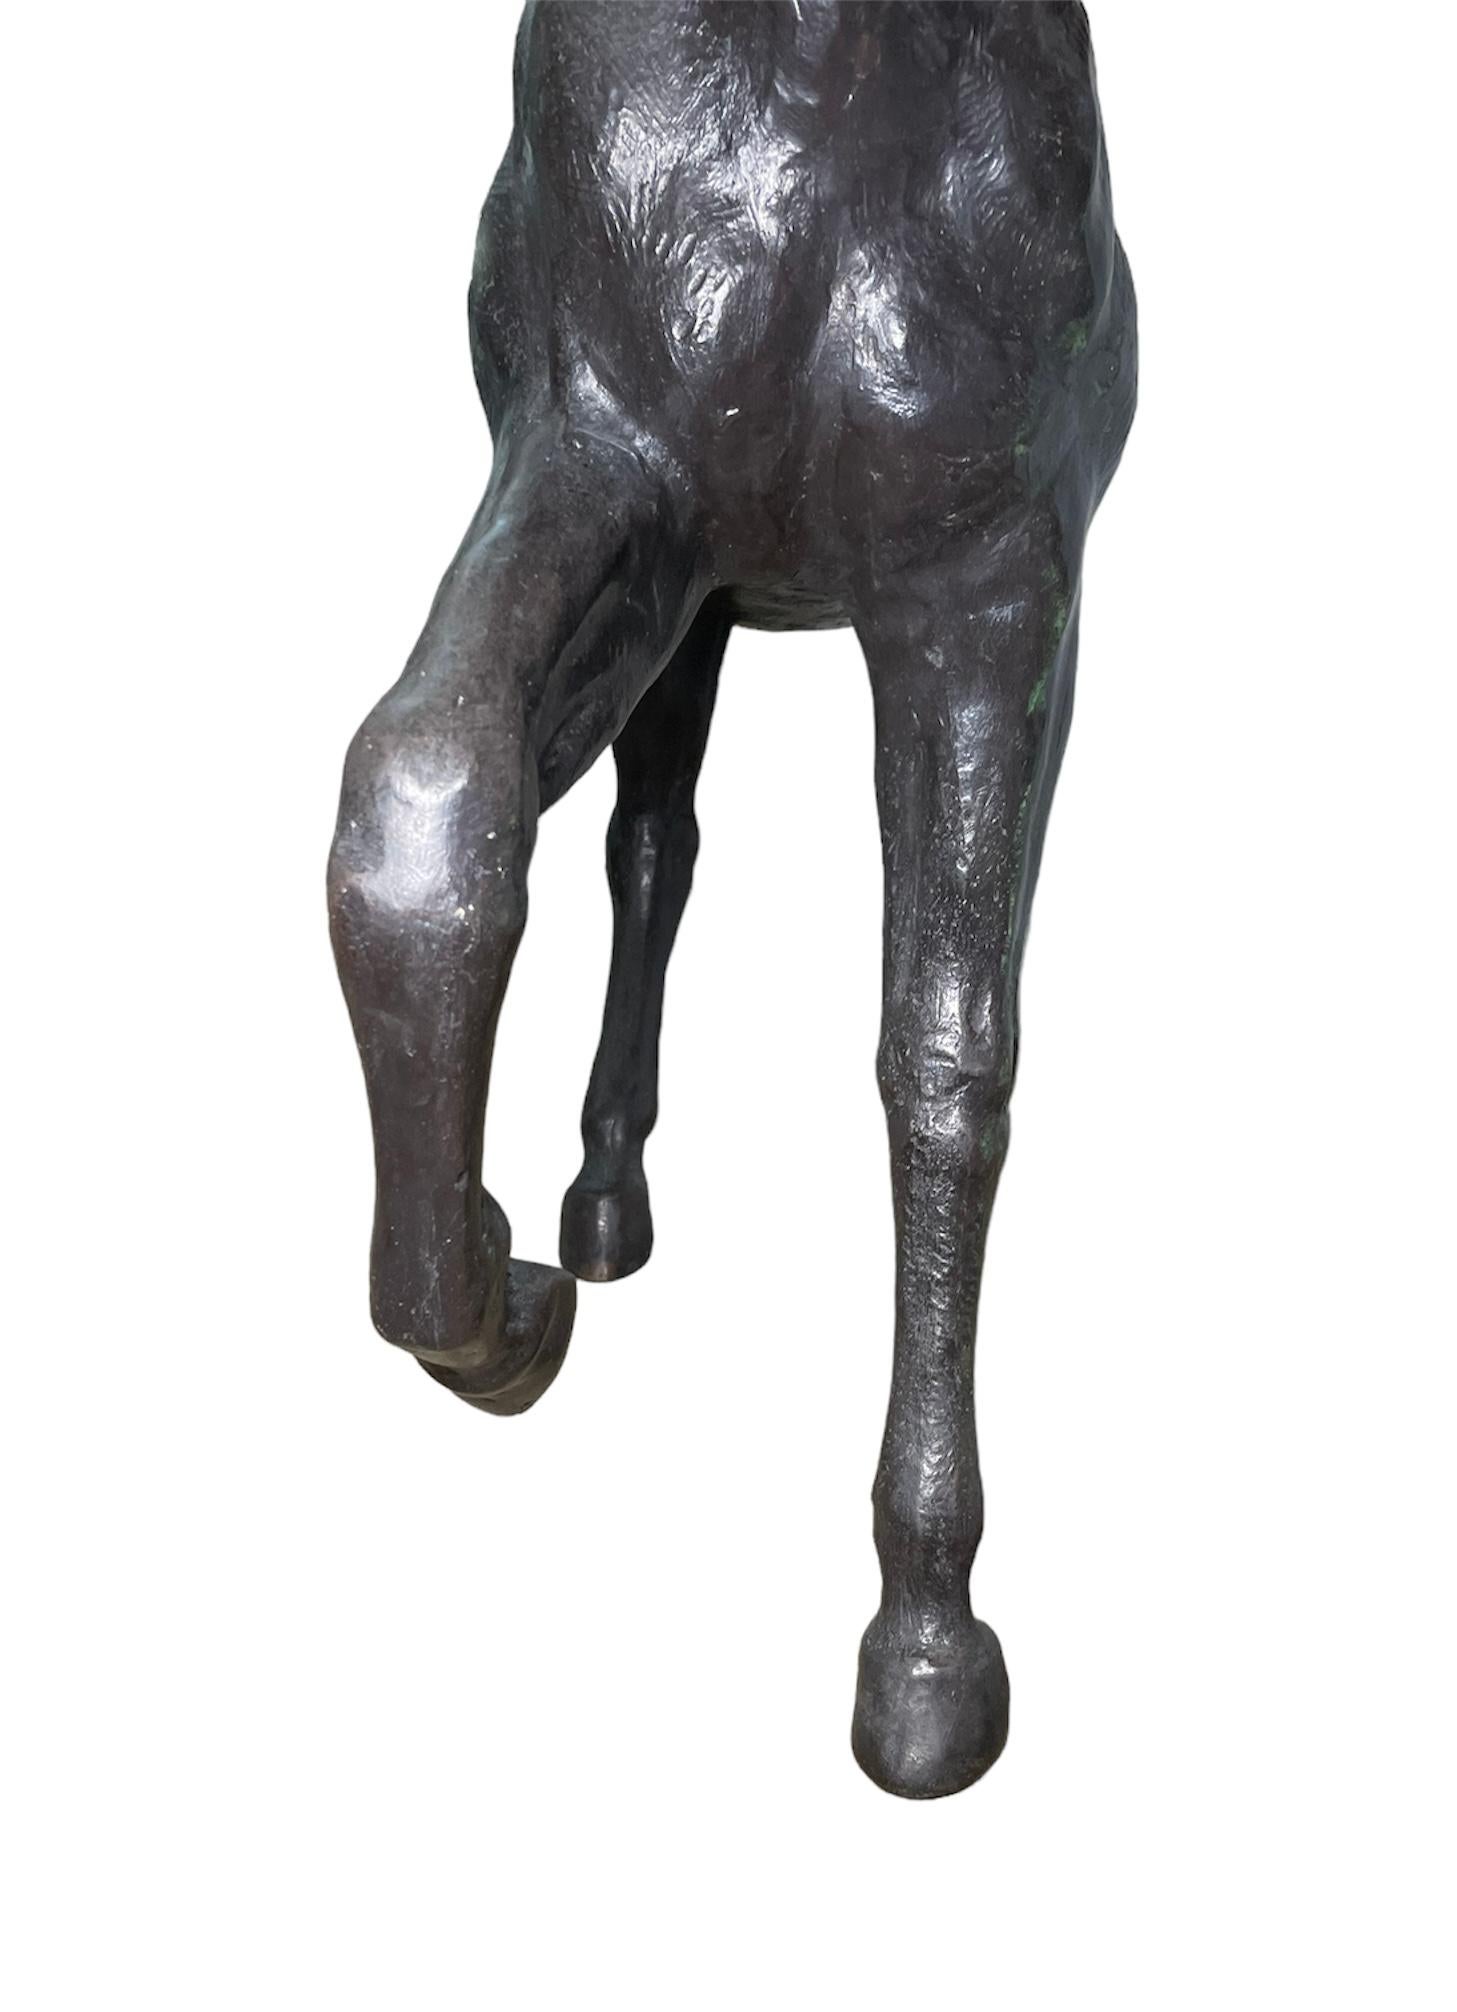 Large and Heavy Patinated Bronze Sculpture/Statue of a Horse 8